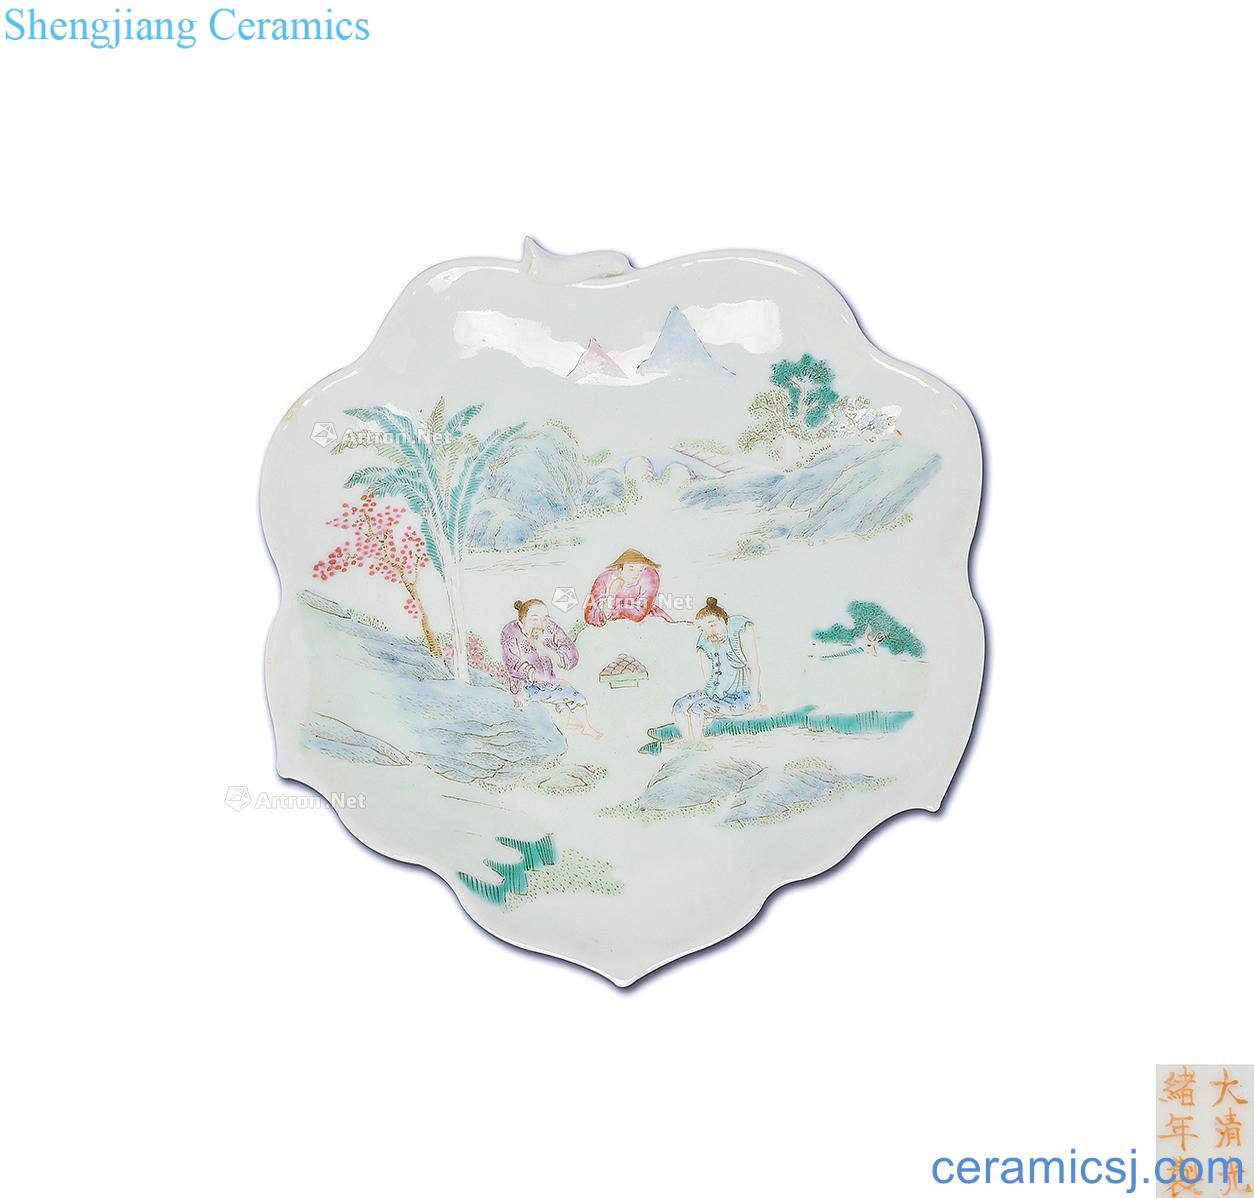 Pastel character reign of qing emperor guangxu leaf shape plate